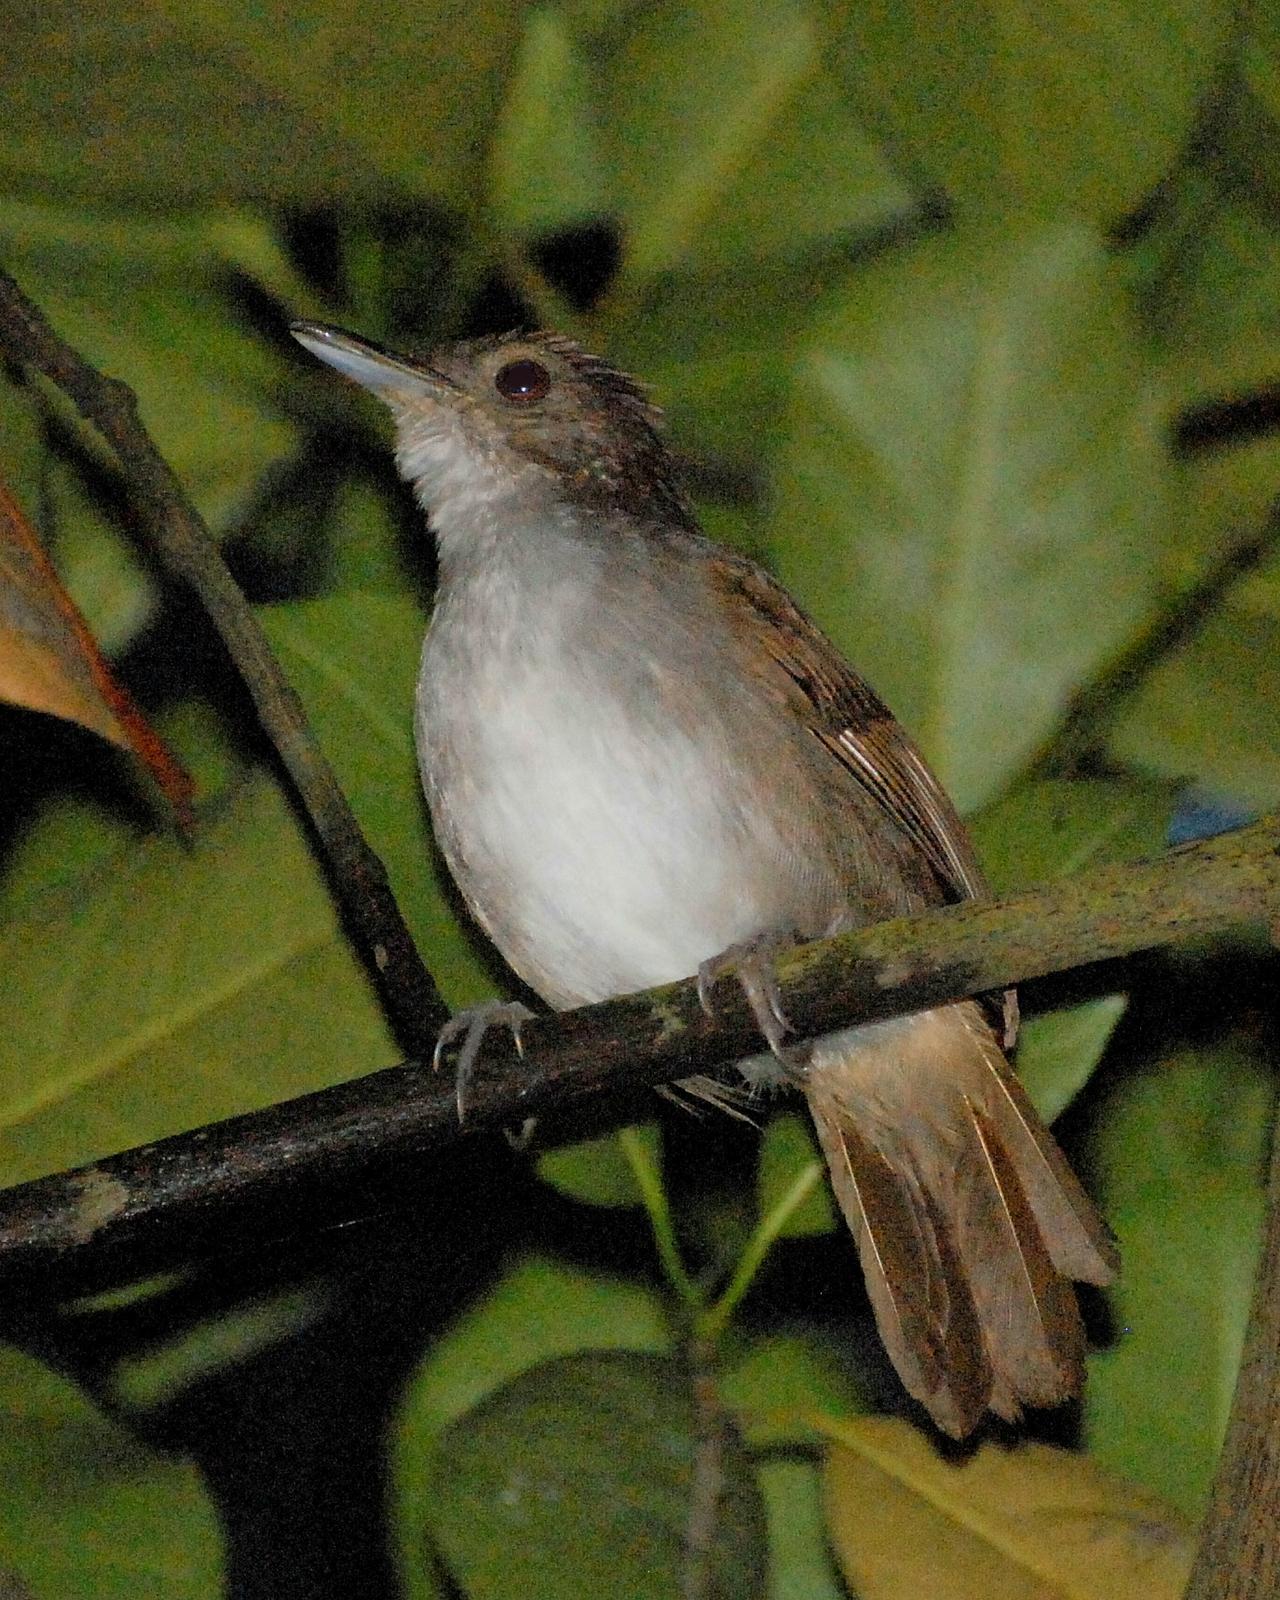 Sulawesi Babbler Photo by David Hollie